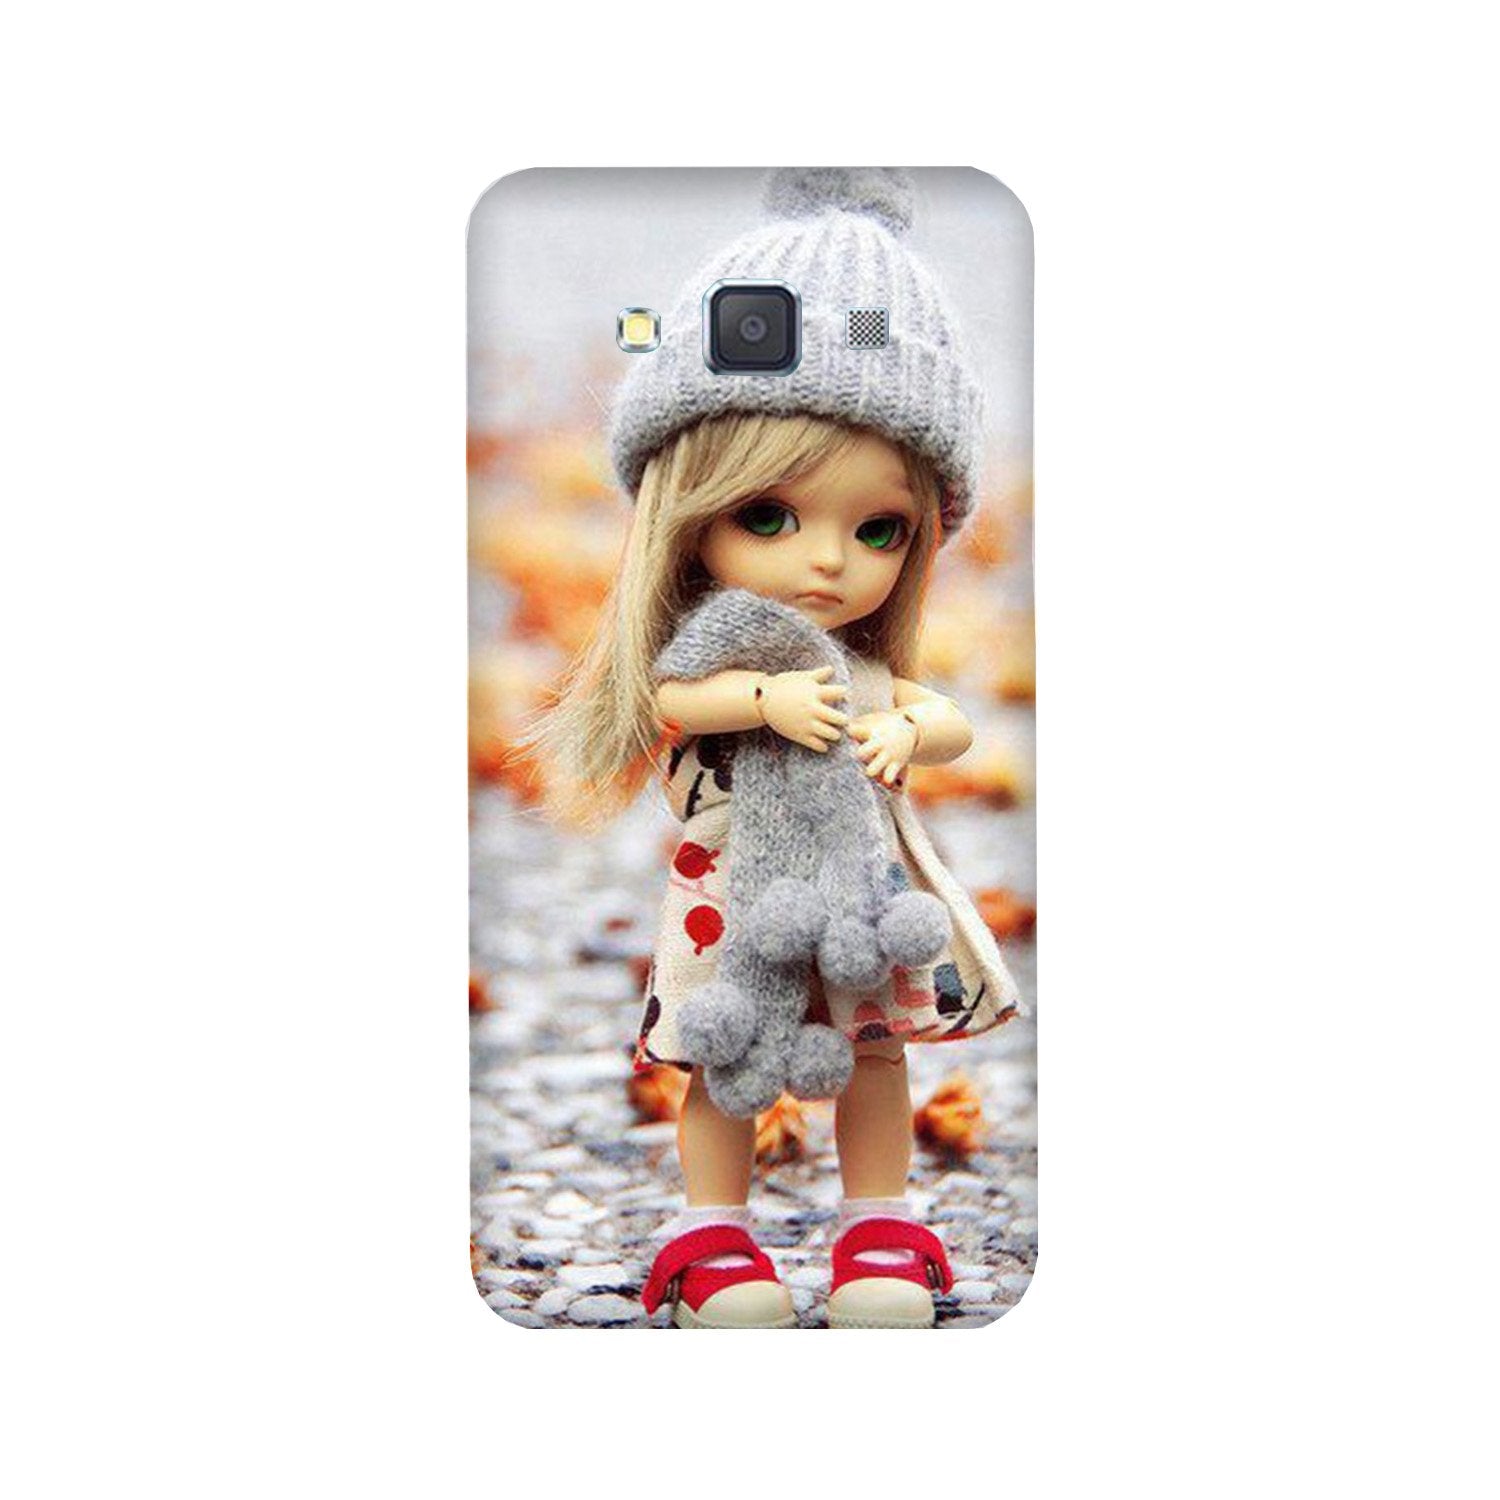 Cute Doll Case for Galaxy ON7/ON7 Pro